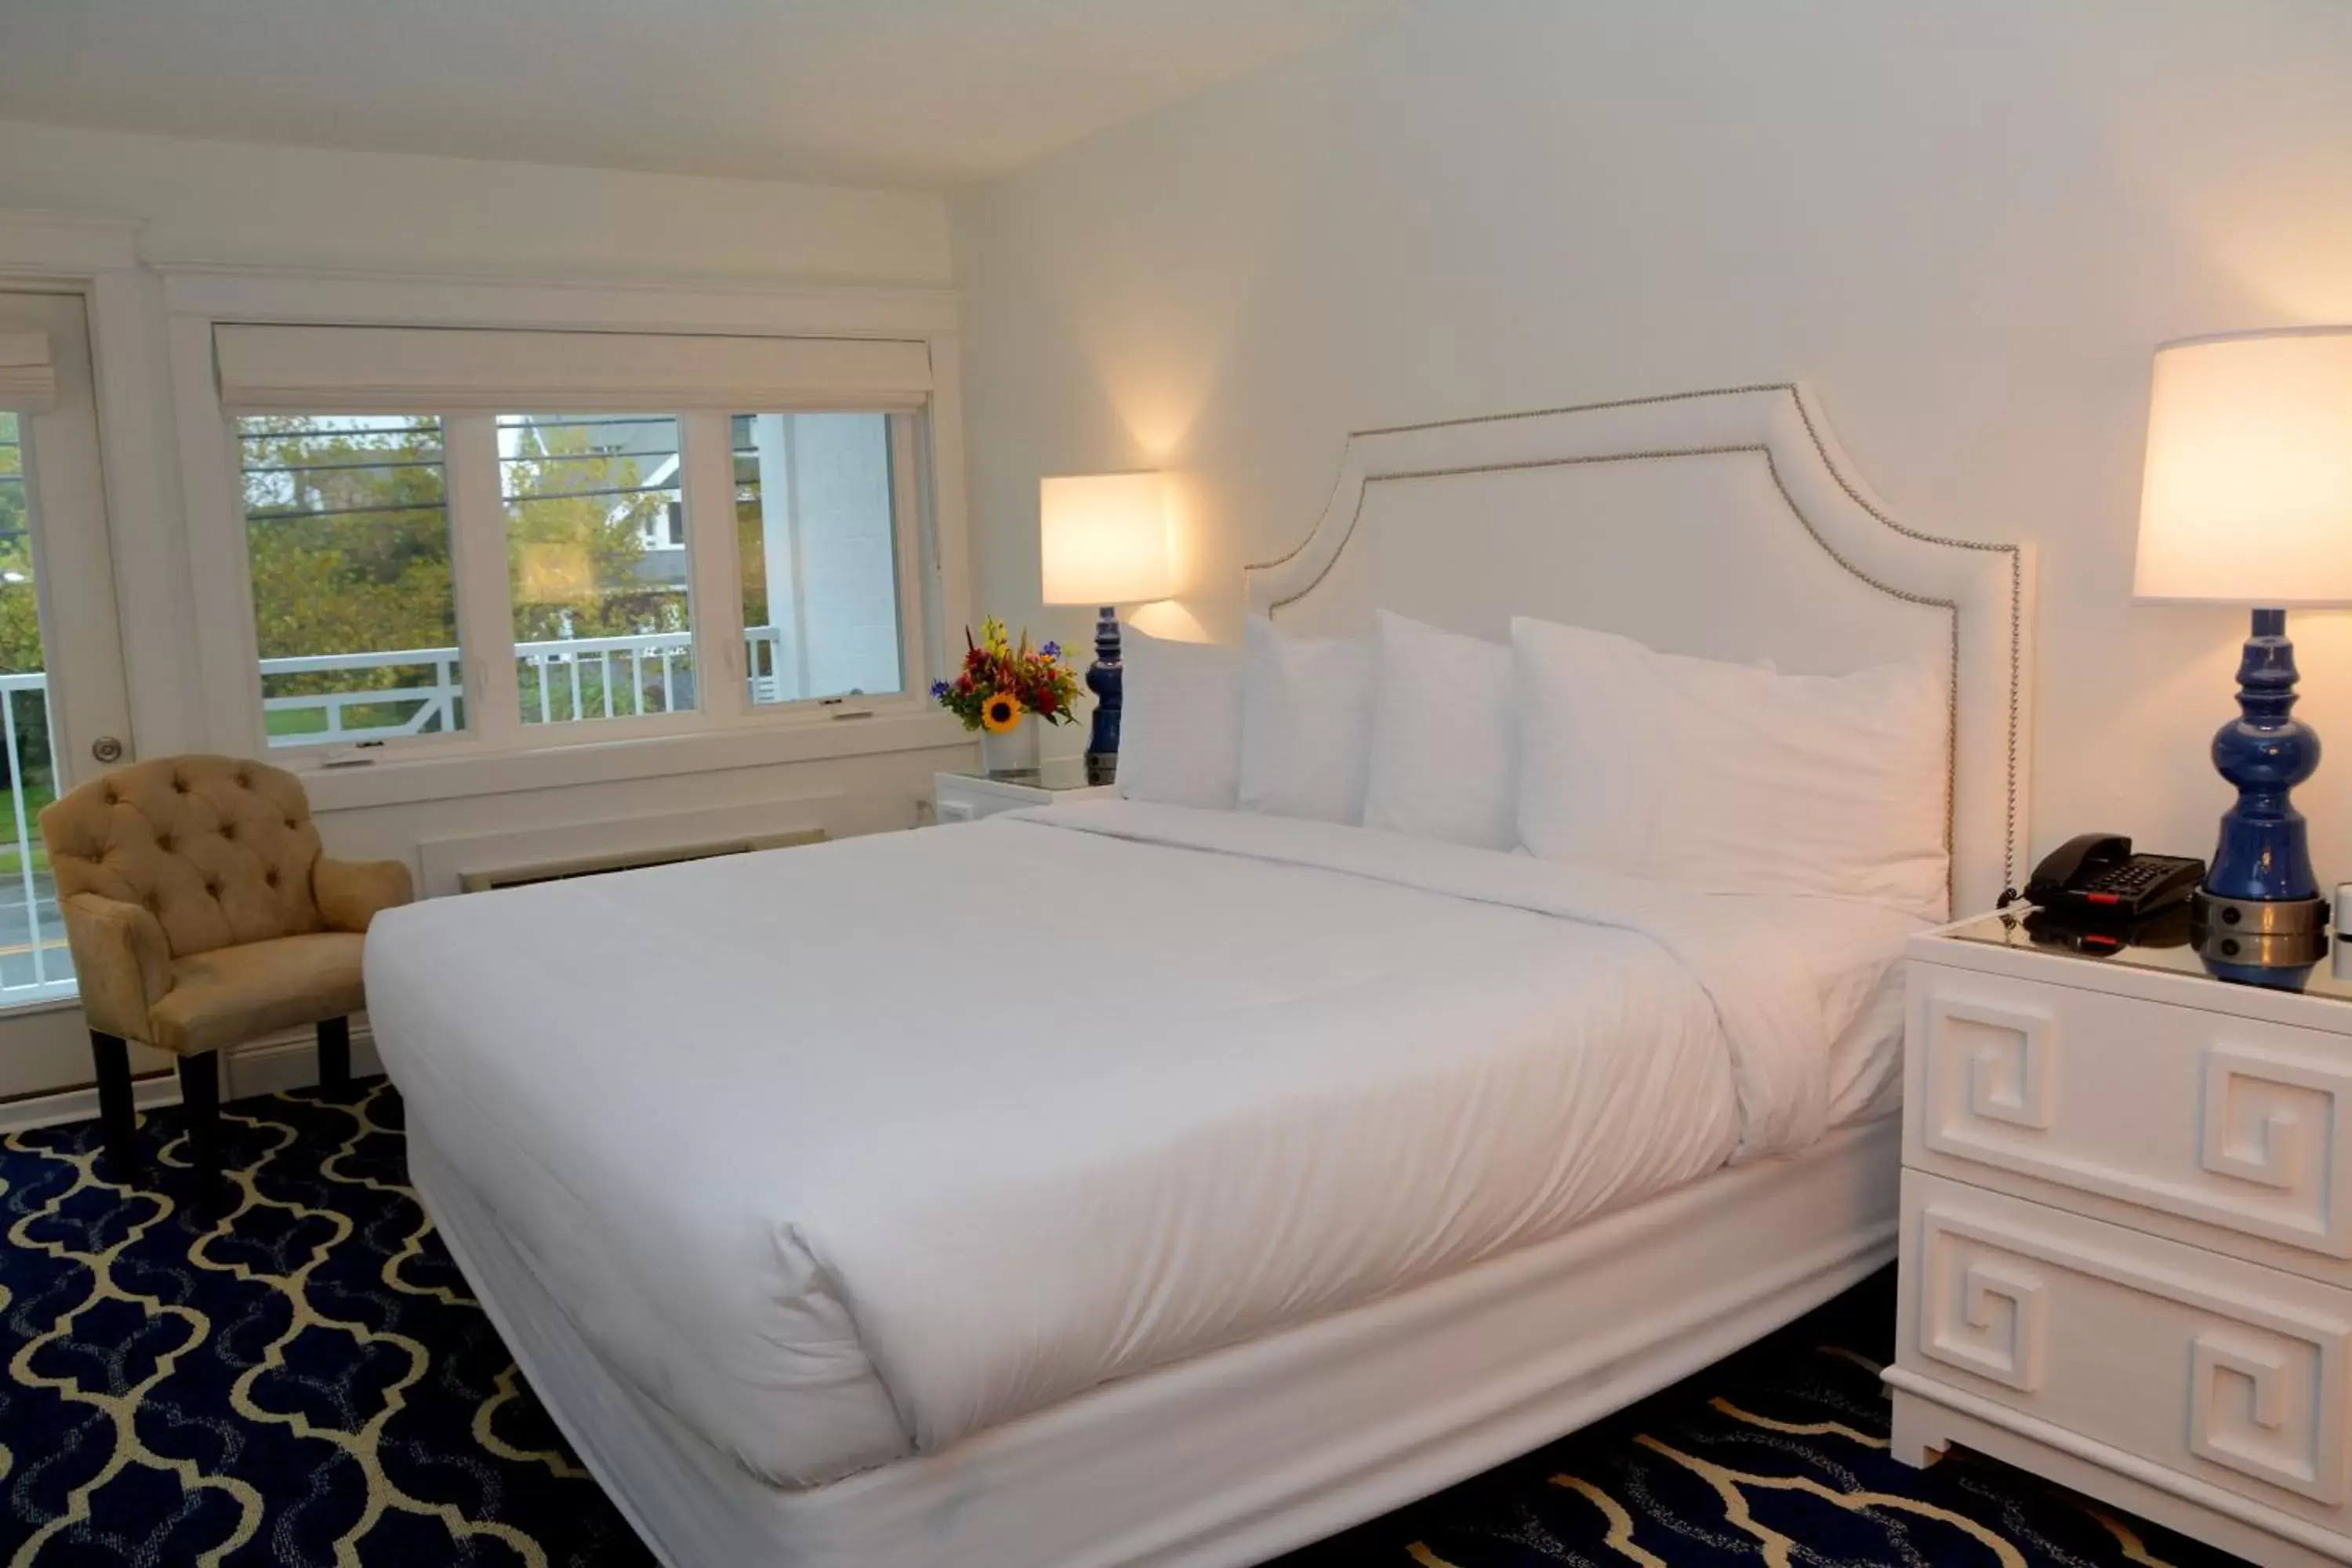 Bed, Room Photo in ICONA Cape May